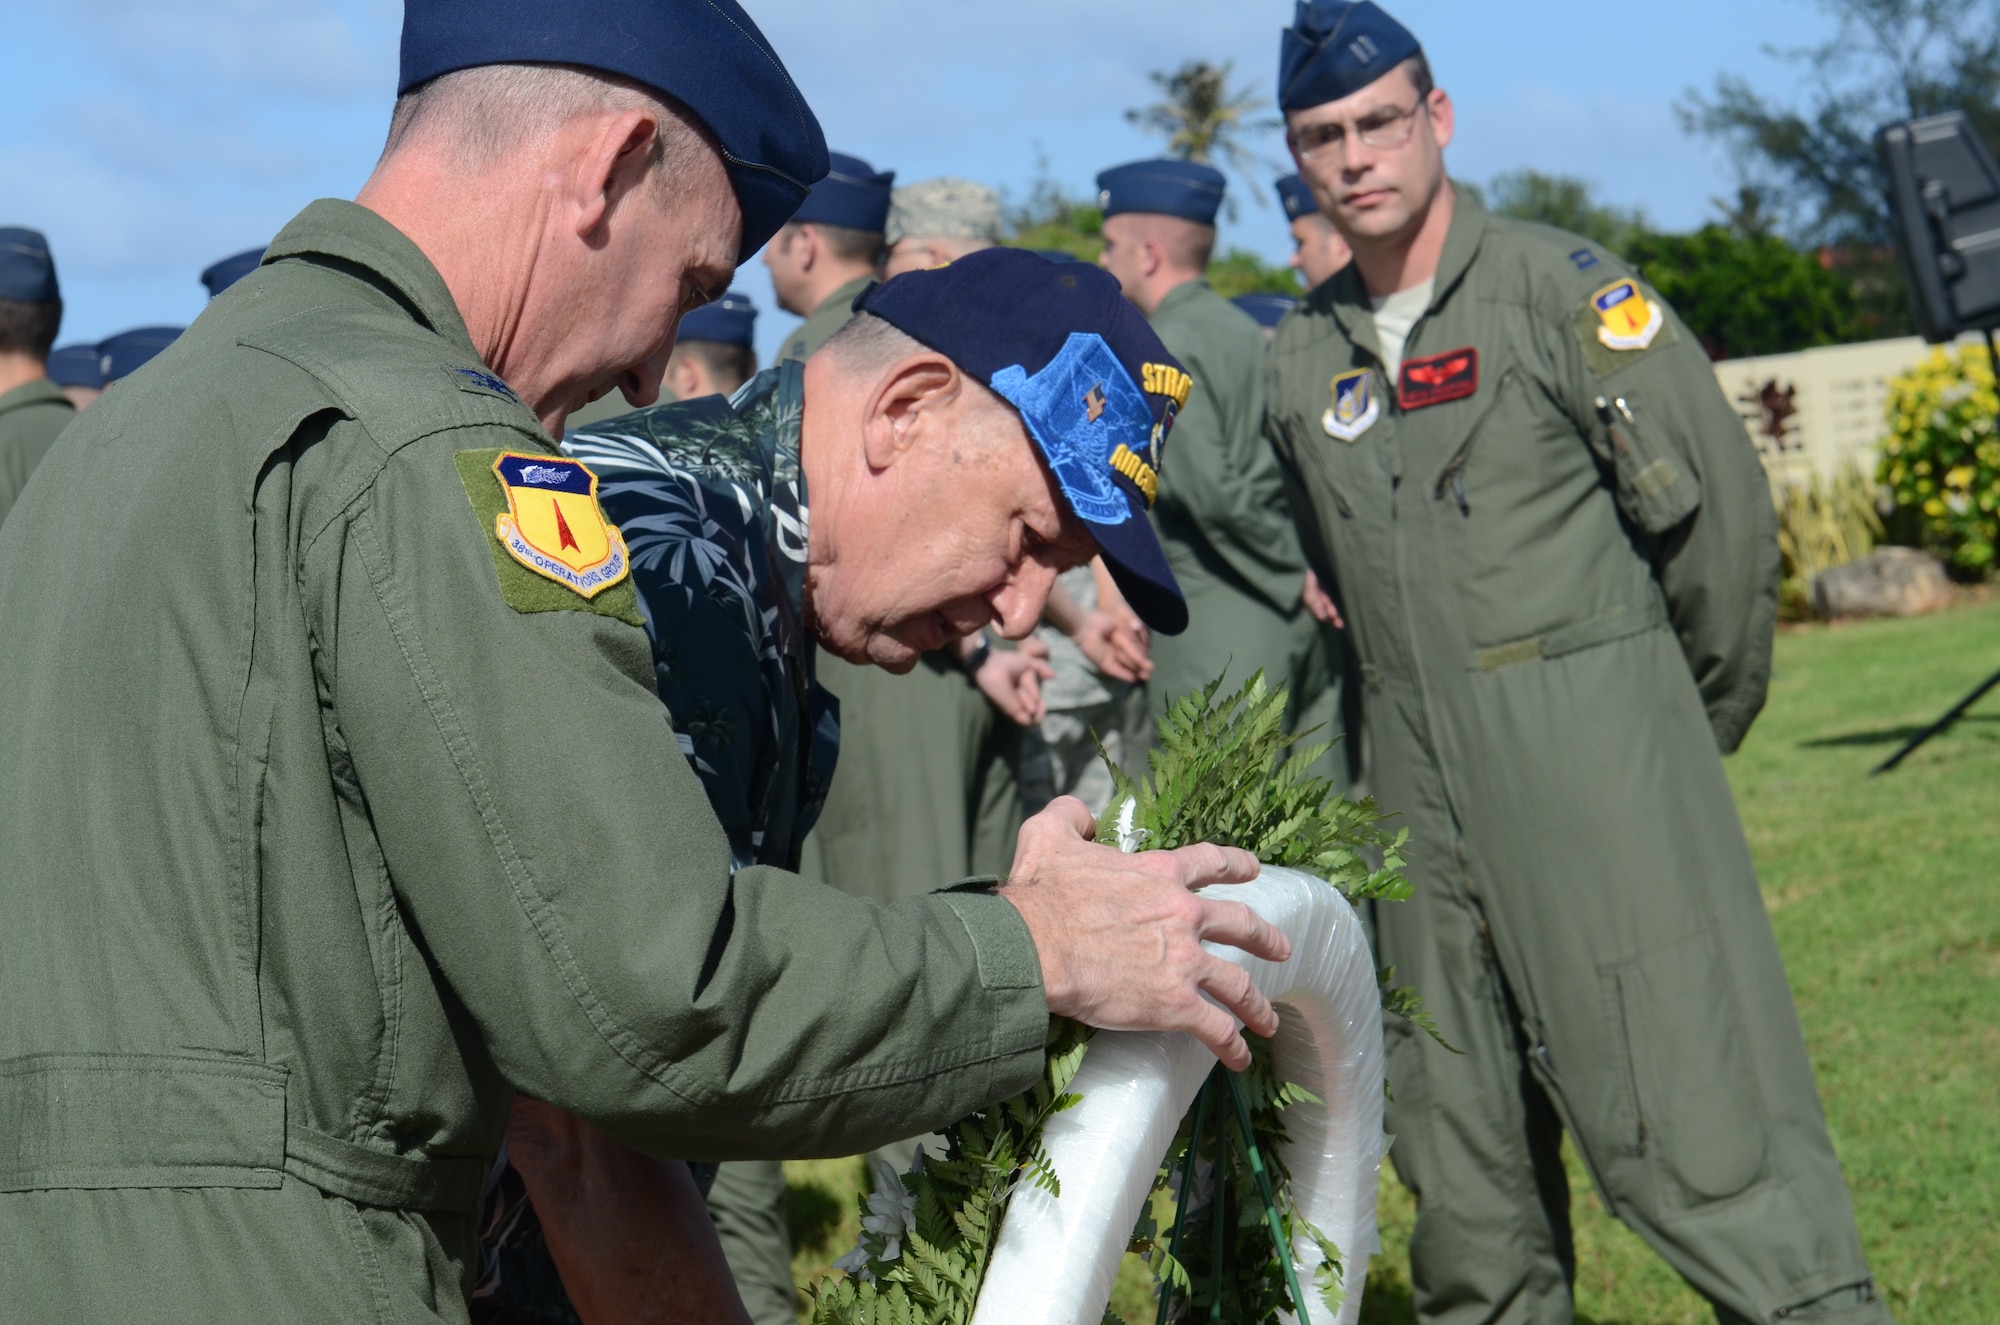 Senior Master Sgt. (ret.) Gary “Boomer” Adams lays the ceremonial wreath with Col. Randy Kaufman, 36th Operations Group commander, during the Operation Linebacker II Remembrance Ceremony at Andersen Air Force Base, Guam, Dec. 14. The ceremony commemorated the 40th anniversary of the Linebacker II campaign that led to the end of the Vietnam War. (U.S. Air Force photo by Senior Airman Benjamin Wiseman/Released)